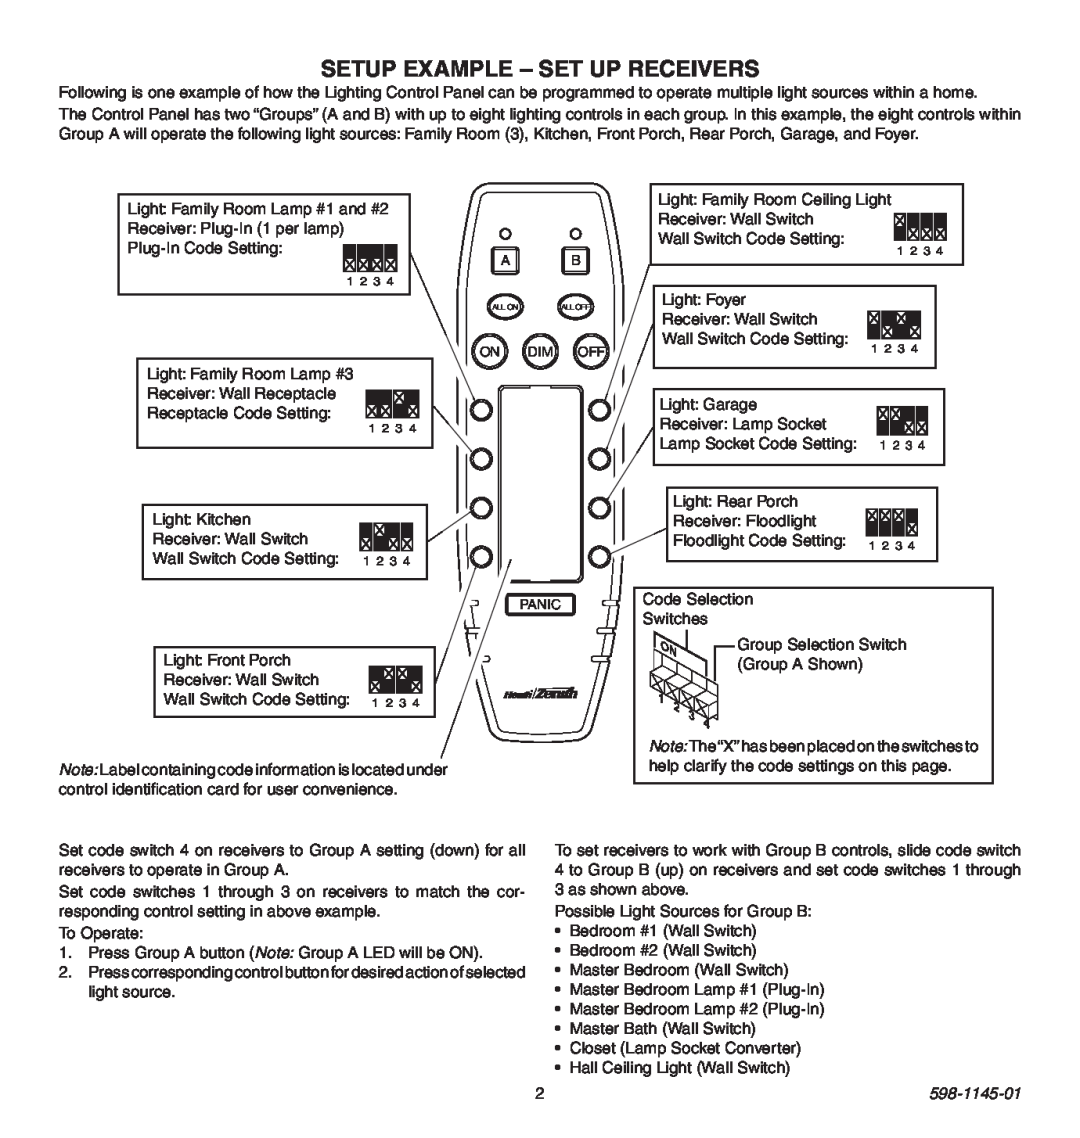 Heath Zenith Multi-Channel Remote Control manual SETUP Example - Set Up Receivers, 598-1145-01 